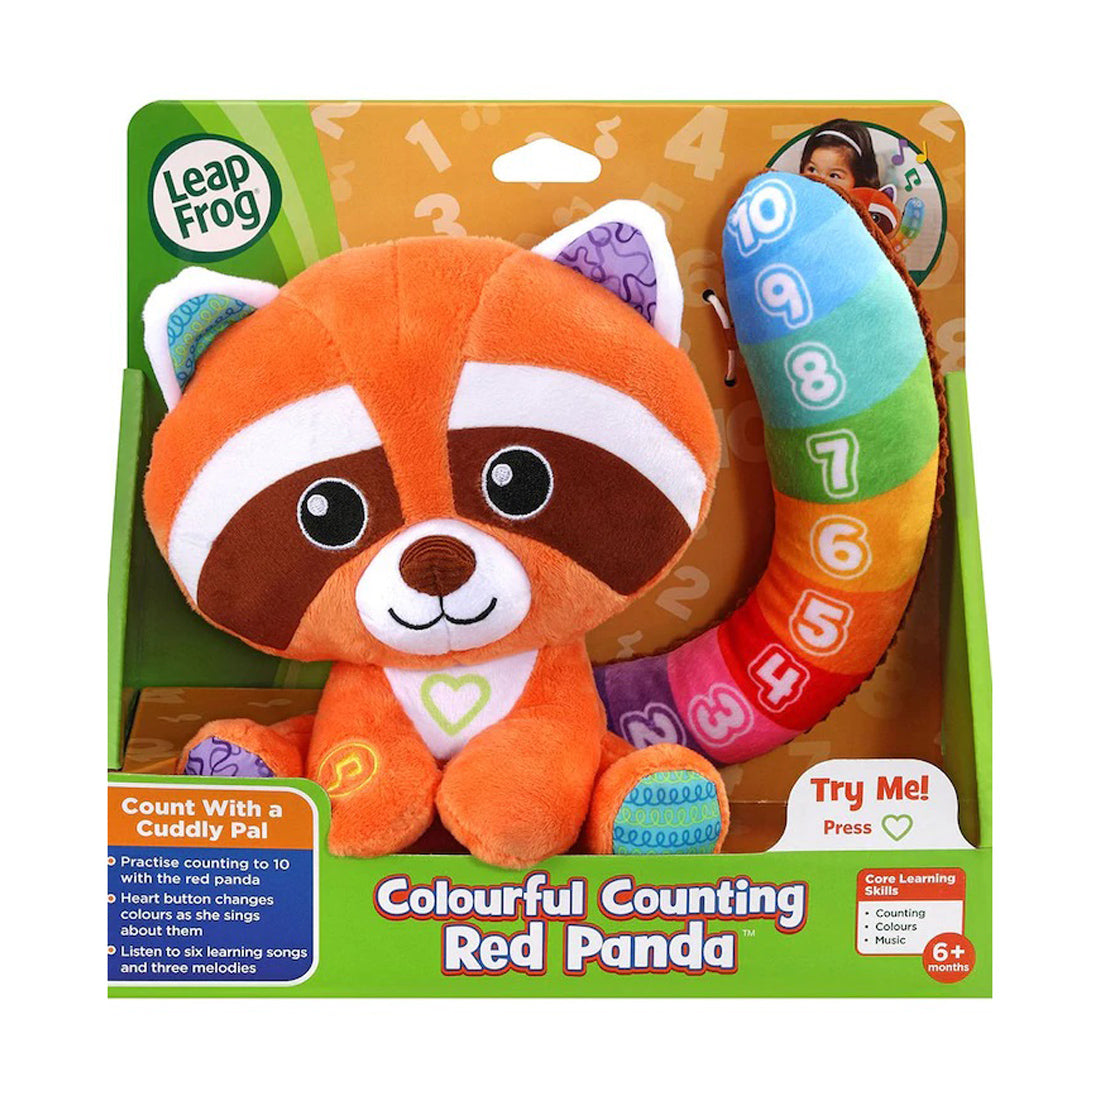 COLOURFUL COUNTING RED PANDA